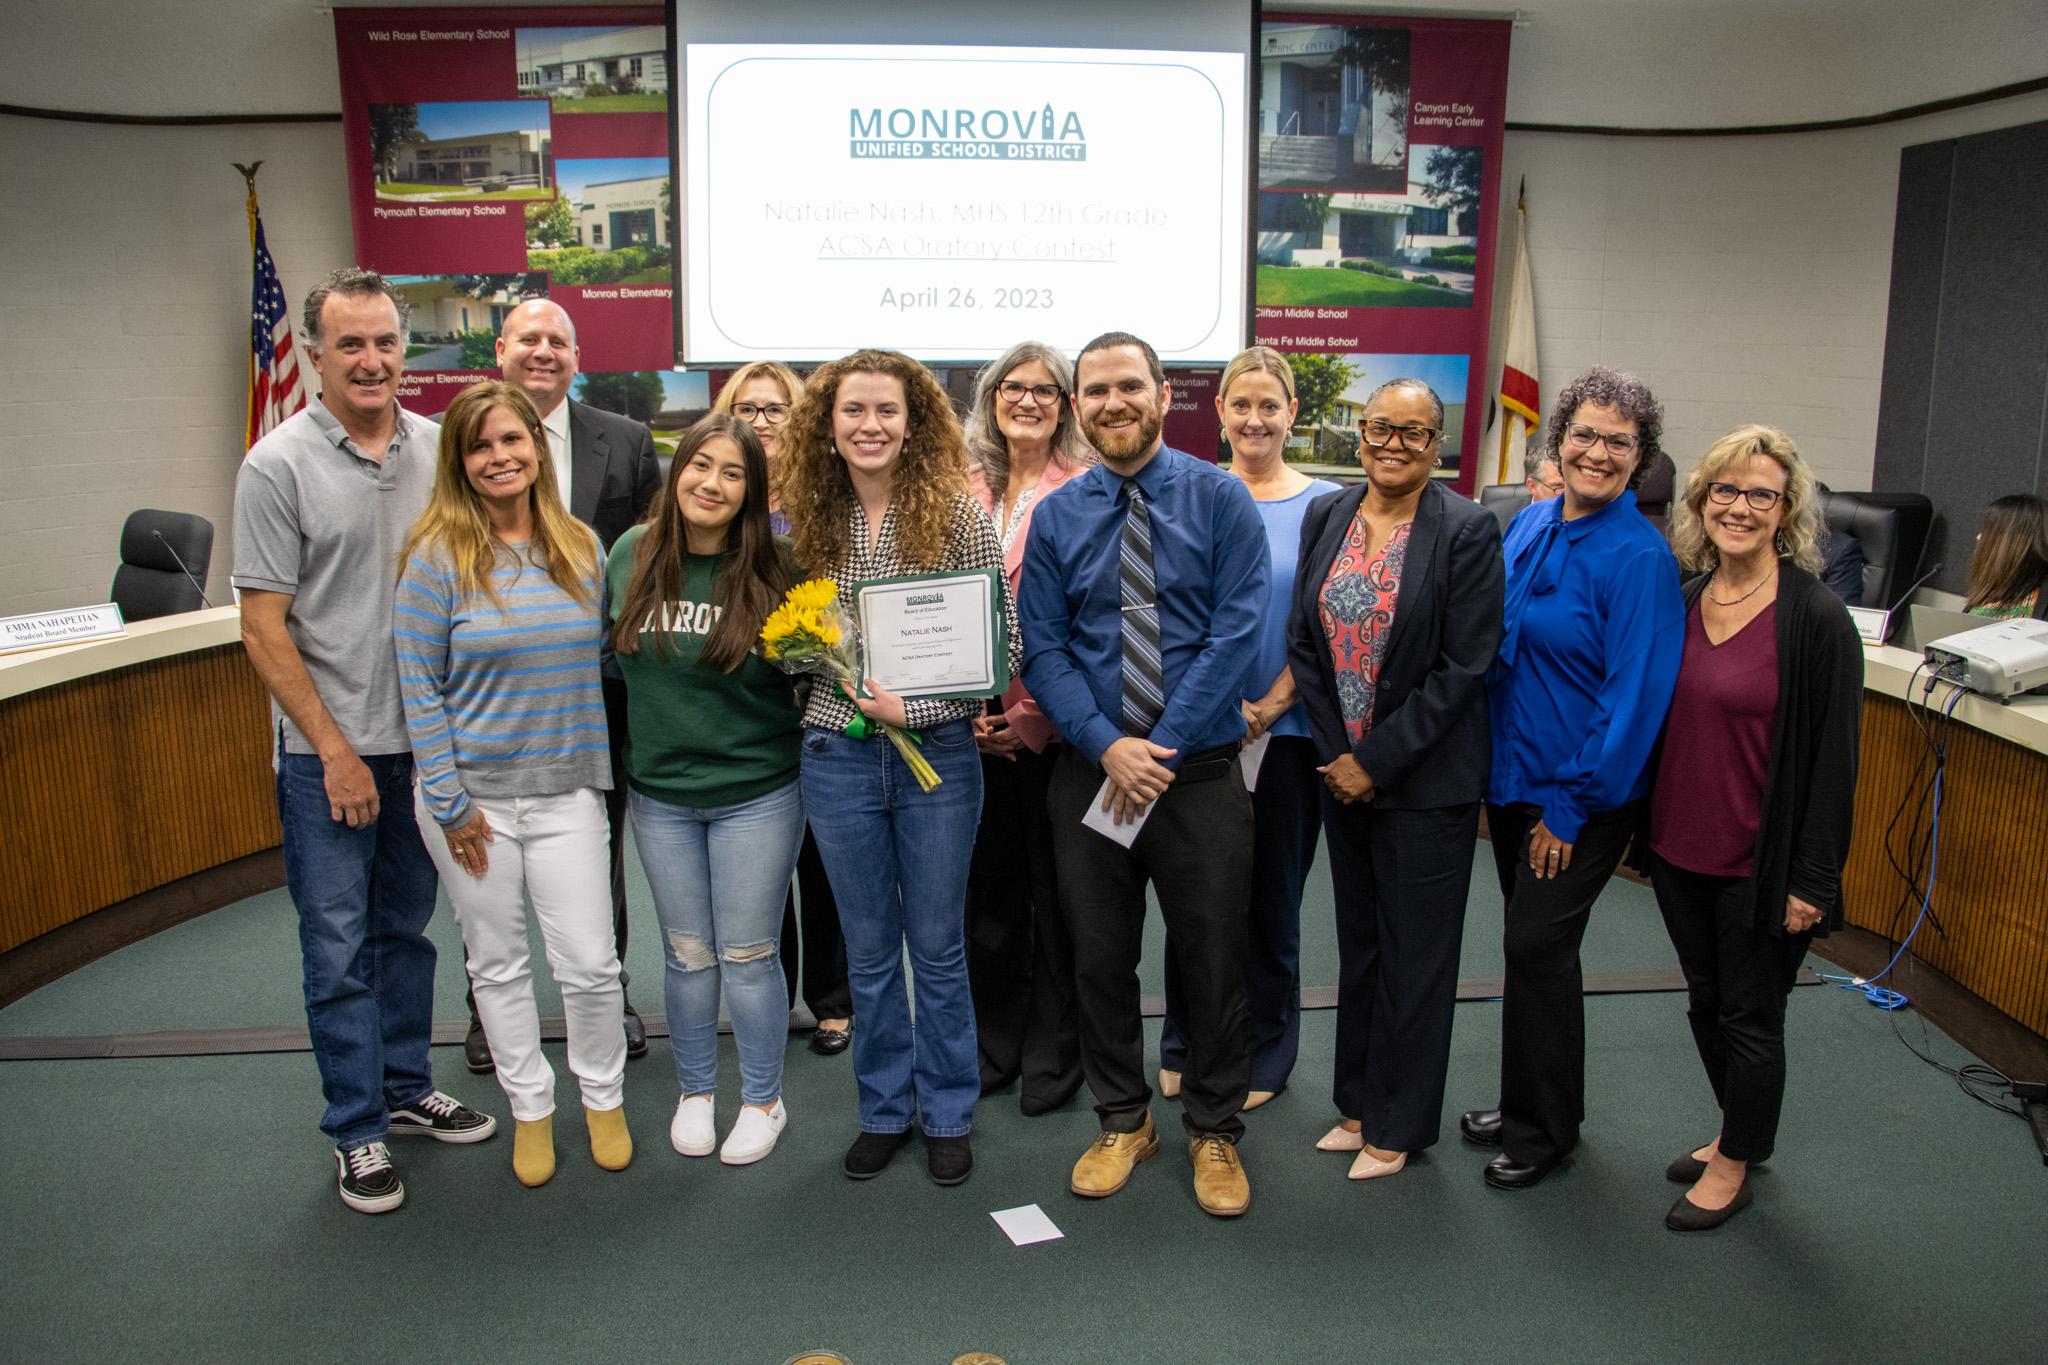 The Board of Education recognized MHS senior Natalie Nash for winning the Association of California School Administrators Oratory Contest.